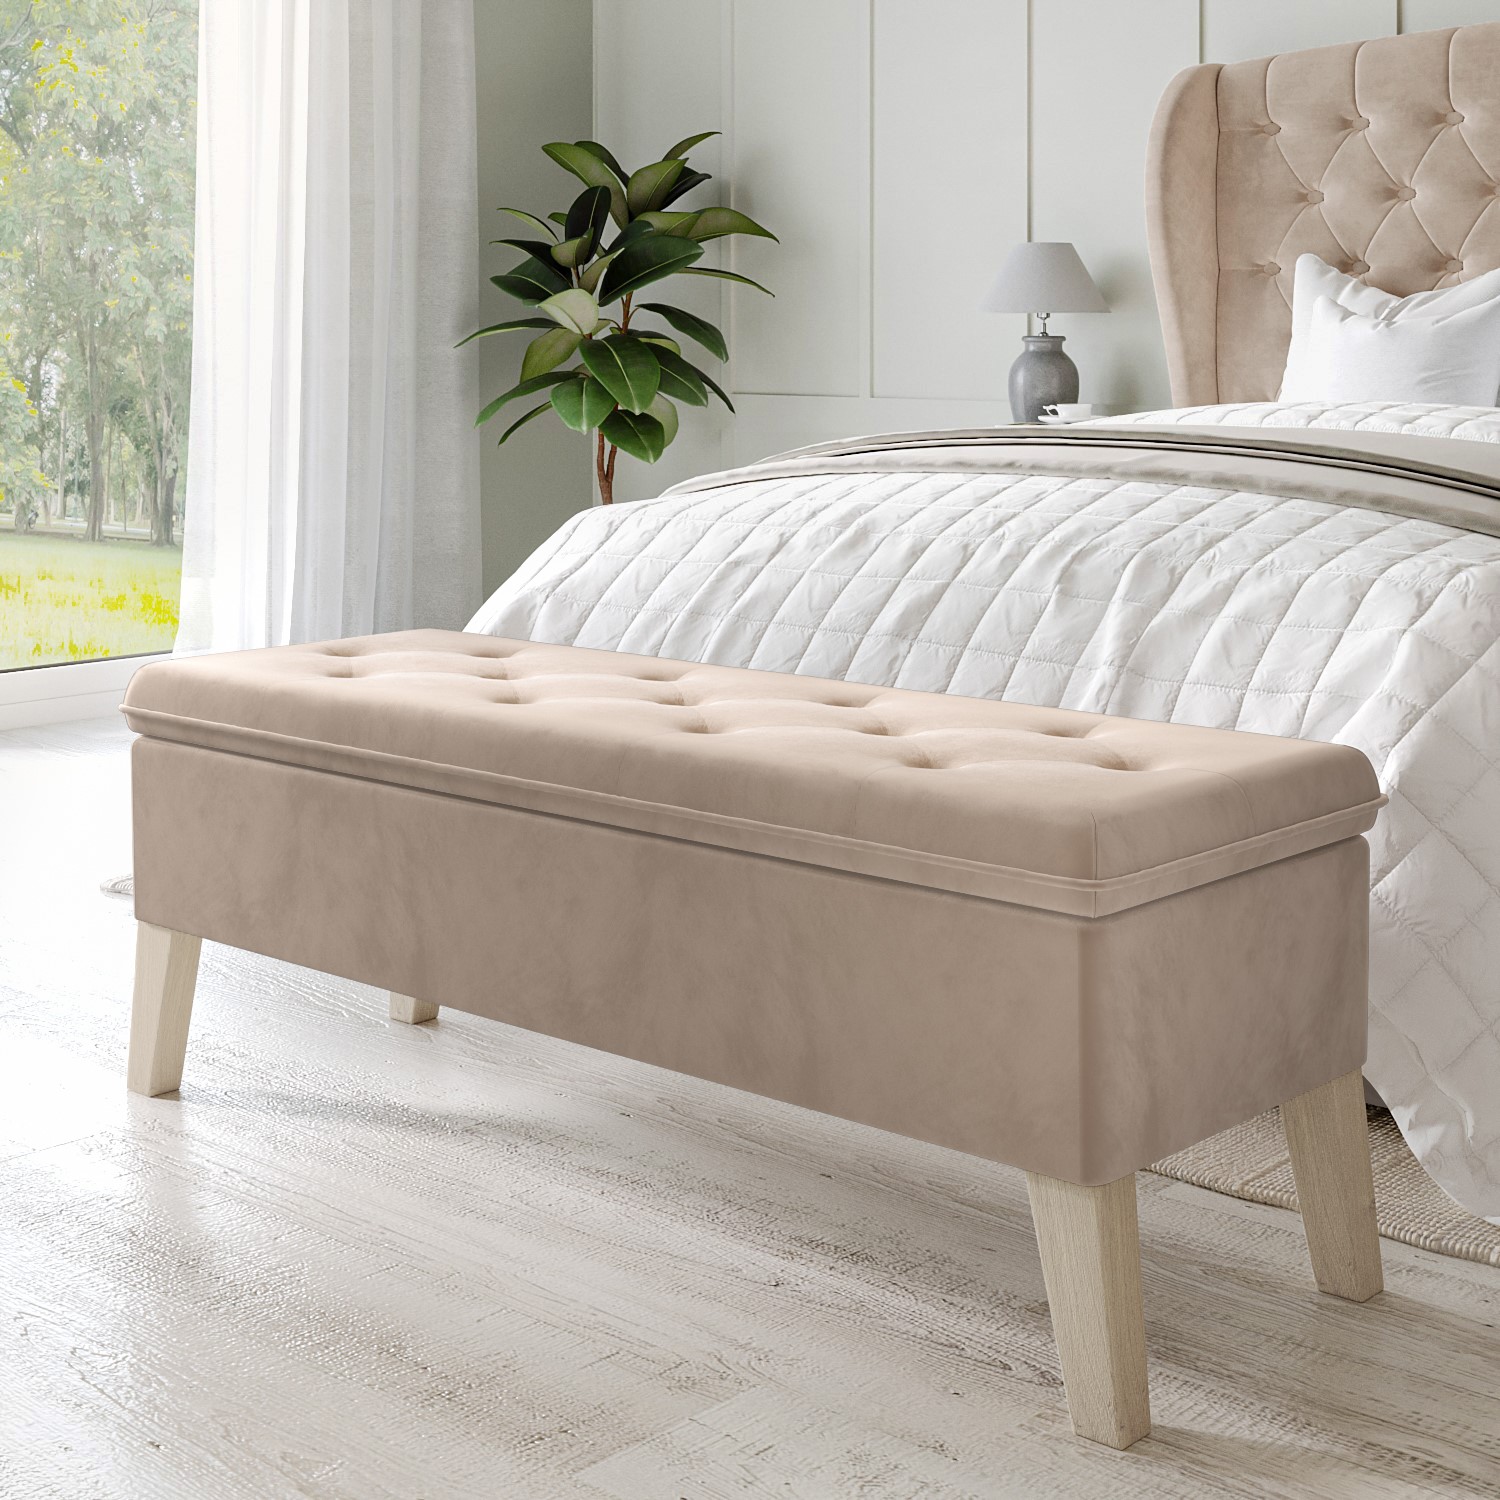 Photo of Cushioned end-of-bed ottoman storage bench in beige velvet - cameron